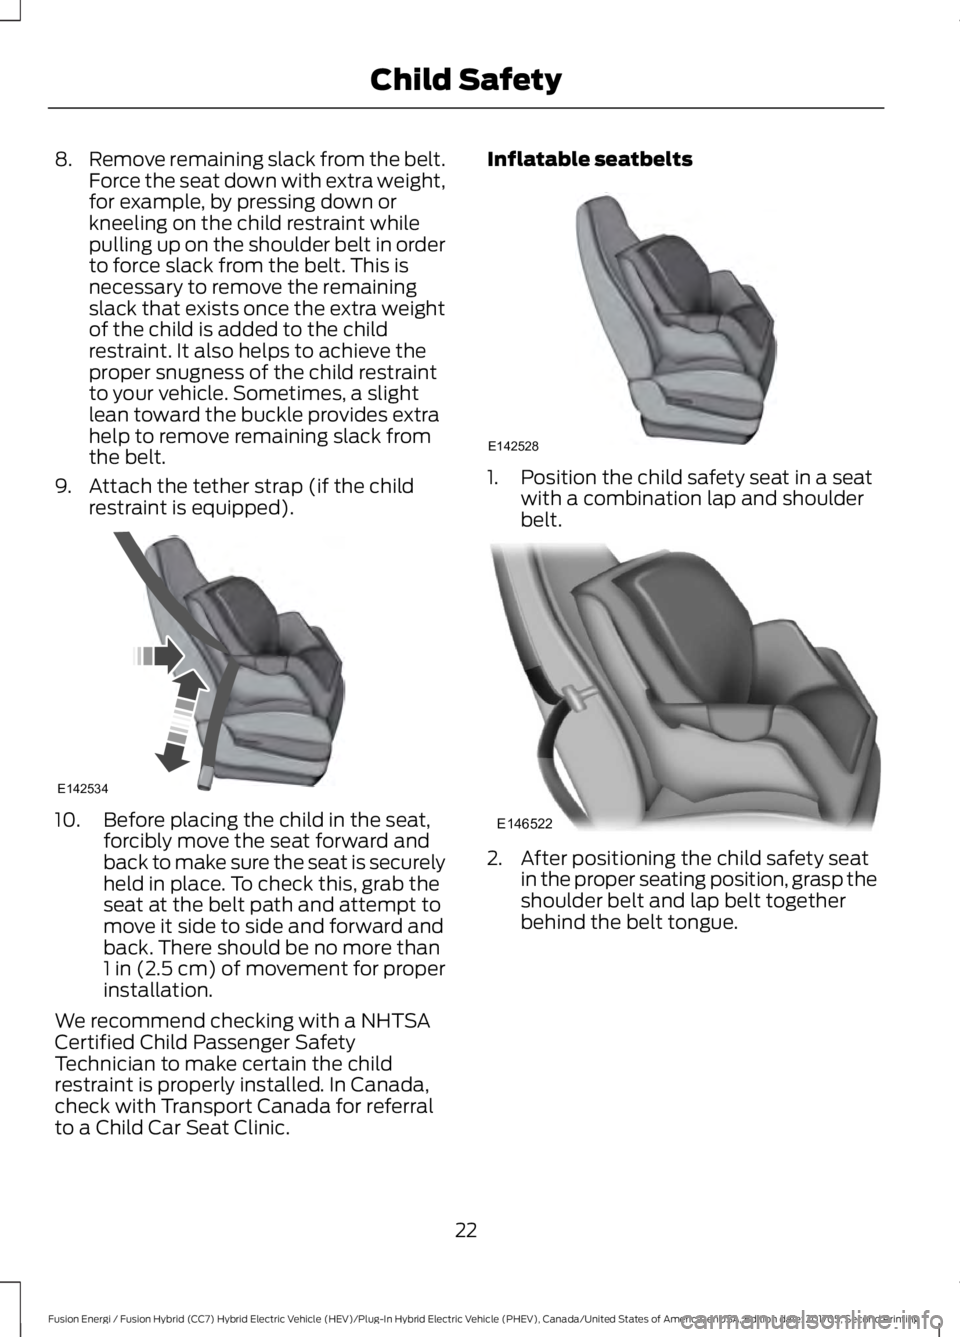 FORD FUSION ENERGI 2018  Owners Manual 8.Remove remaining slack from the belt.Force the seat down with extra weight,for example, by pressing down orkneeling on the child restraint whilepulling up on the shoulder belt in orderto force slack